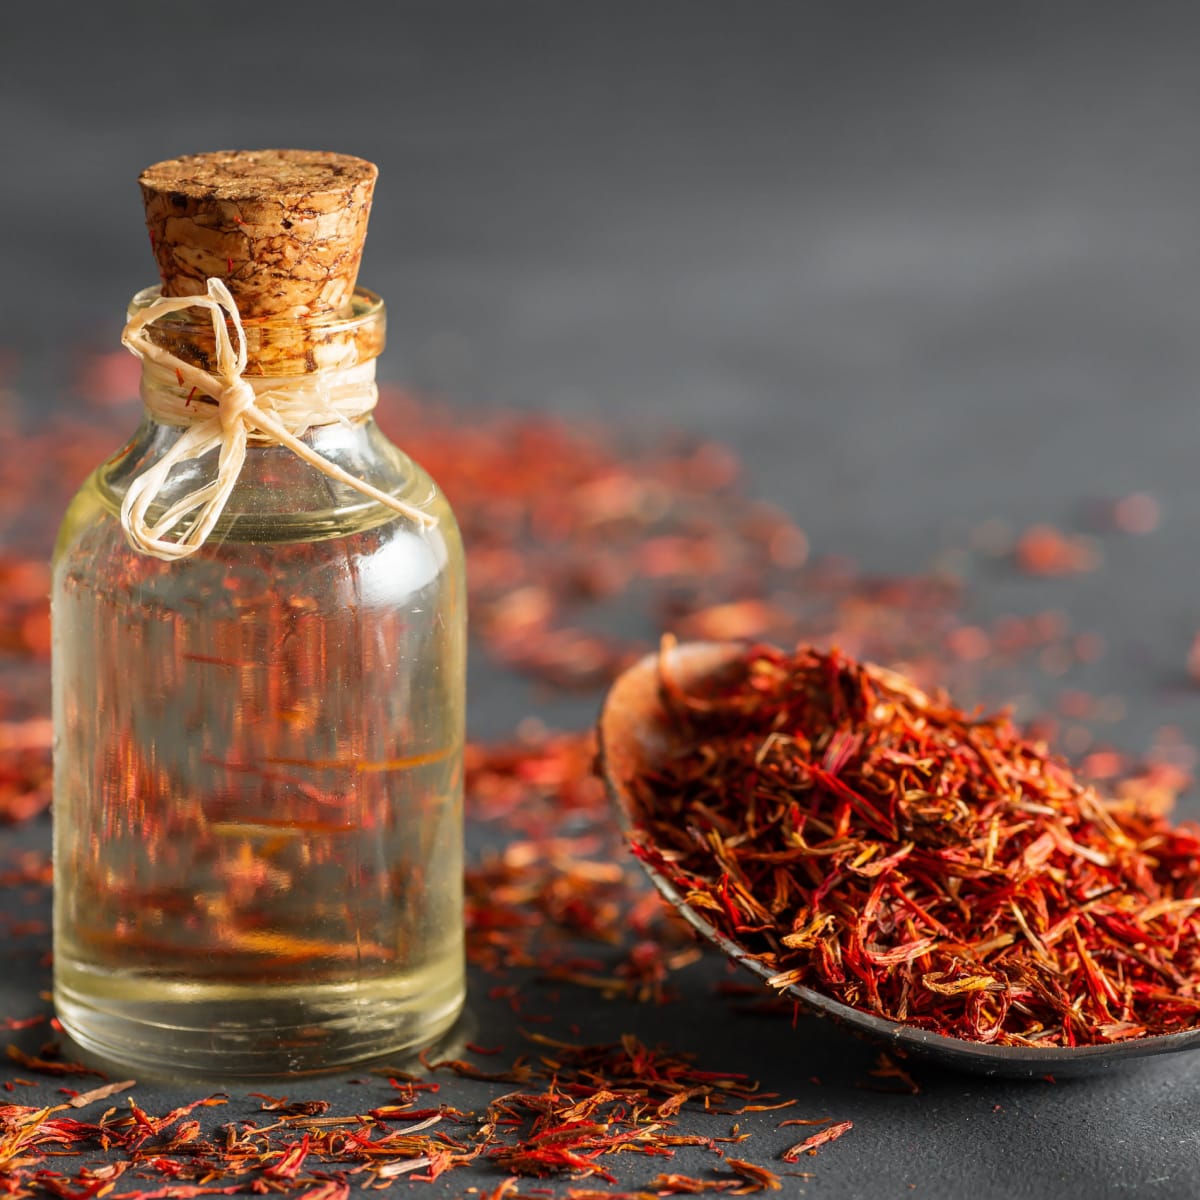 Bottle of Safflower Oil and Dried Safflower on a Spoon